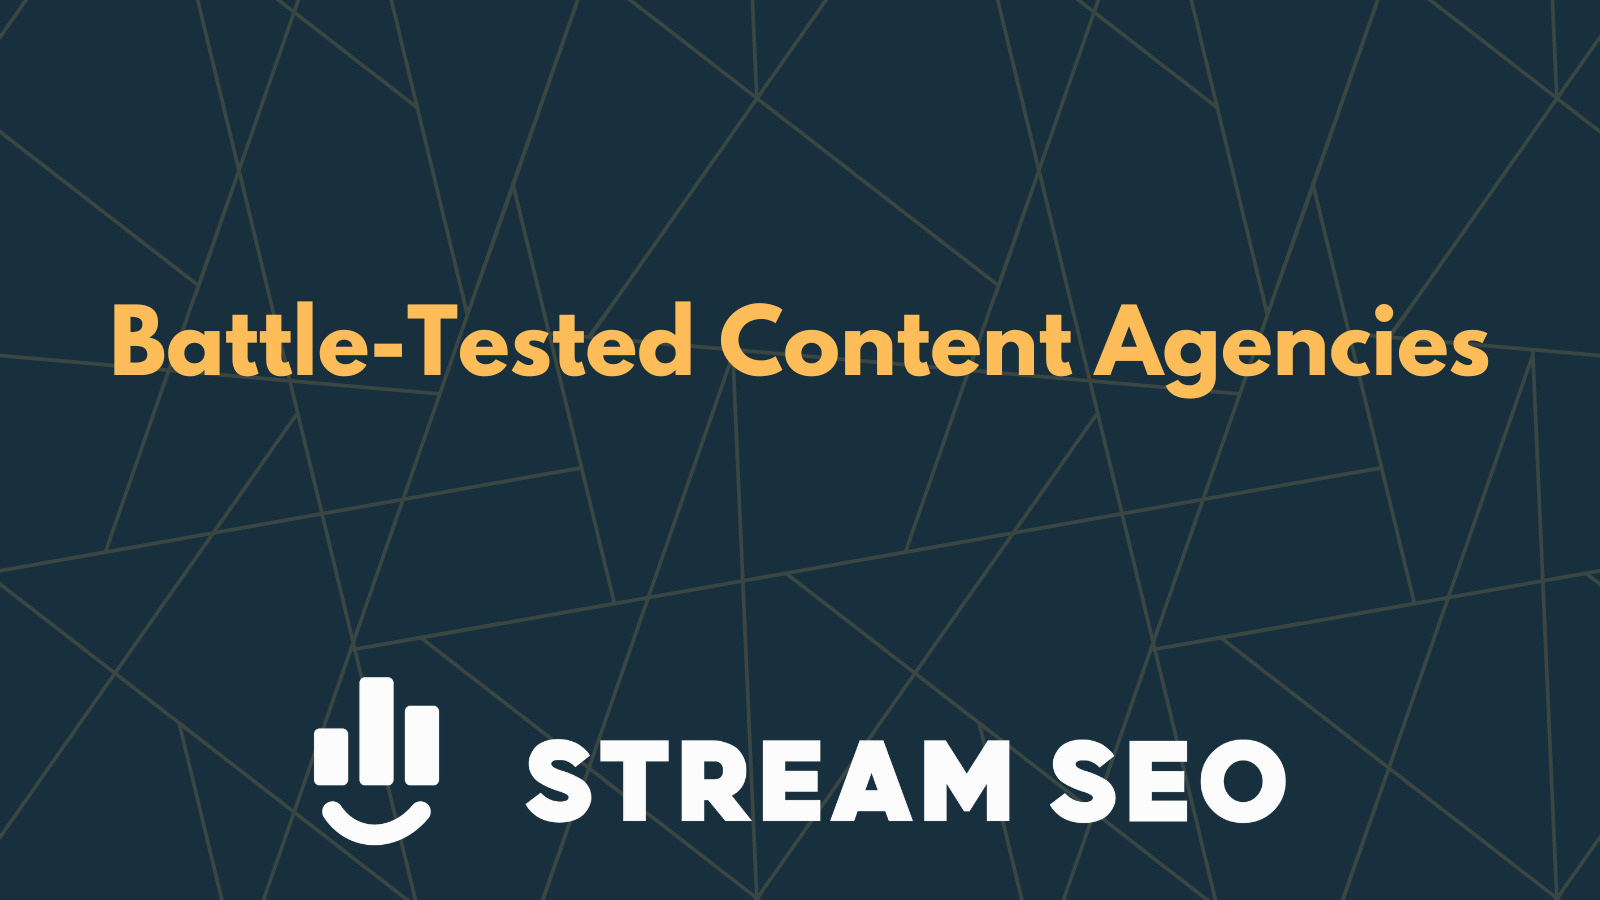 Battle-Tested Content Agencies